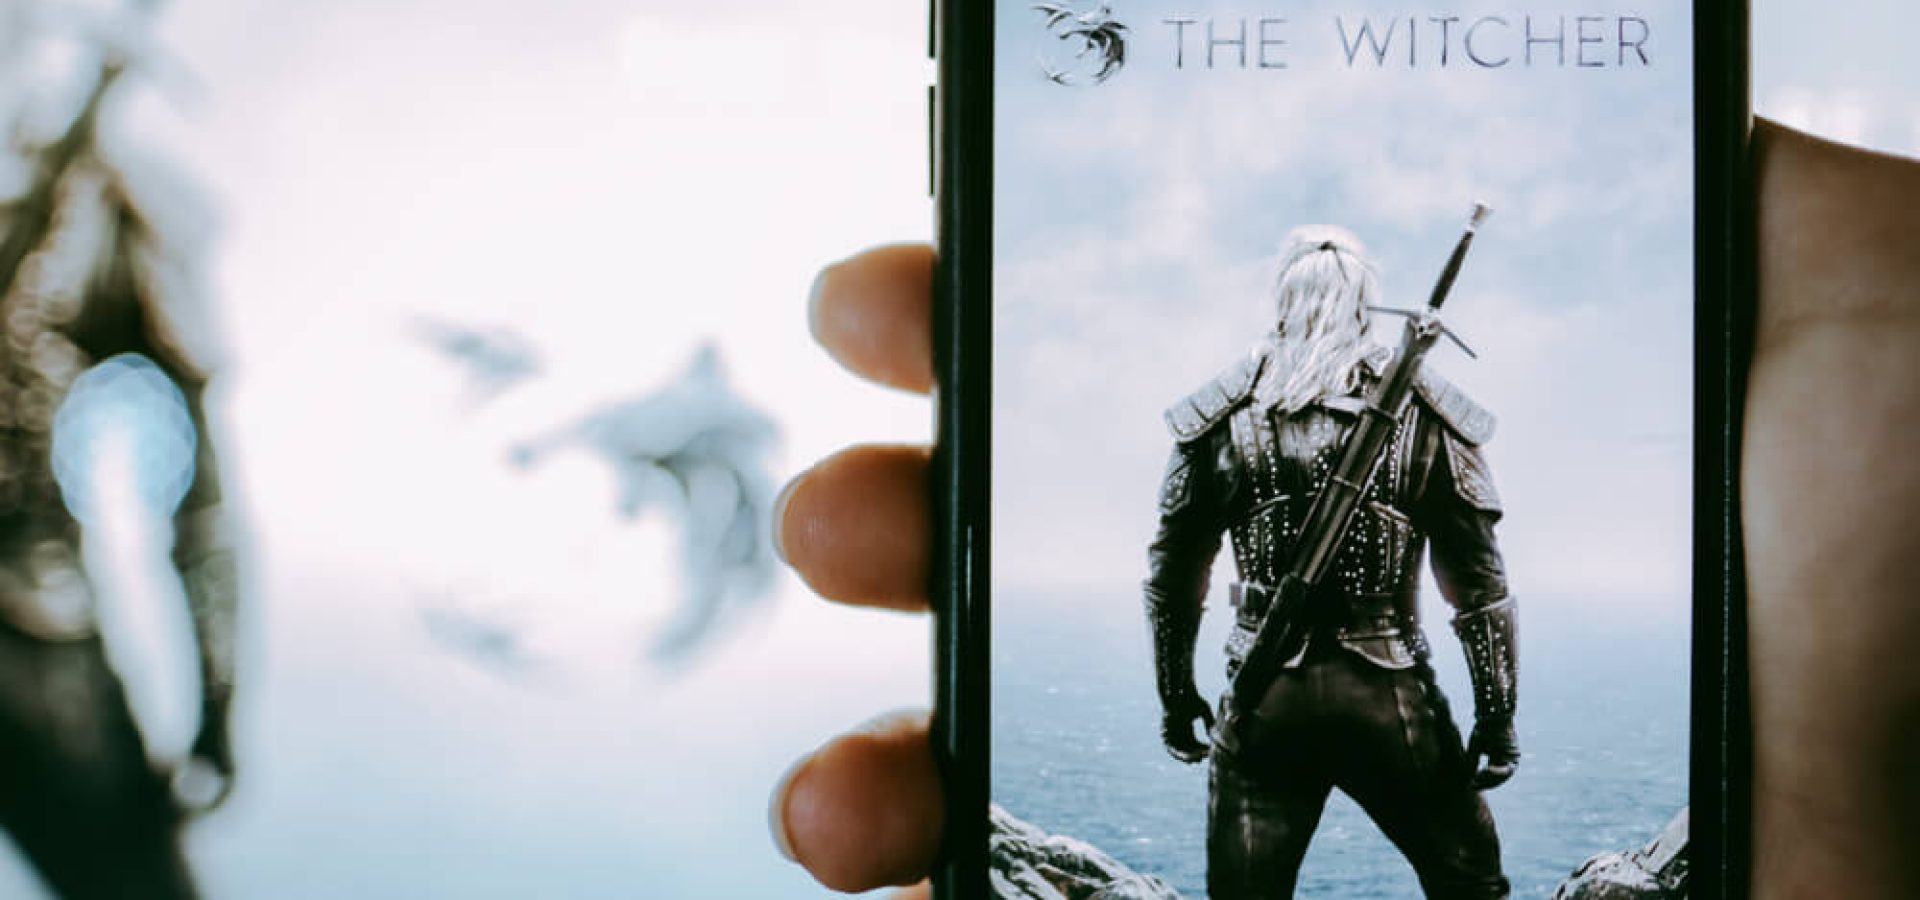 The Witcher from Netflix TV series Poster